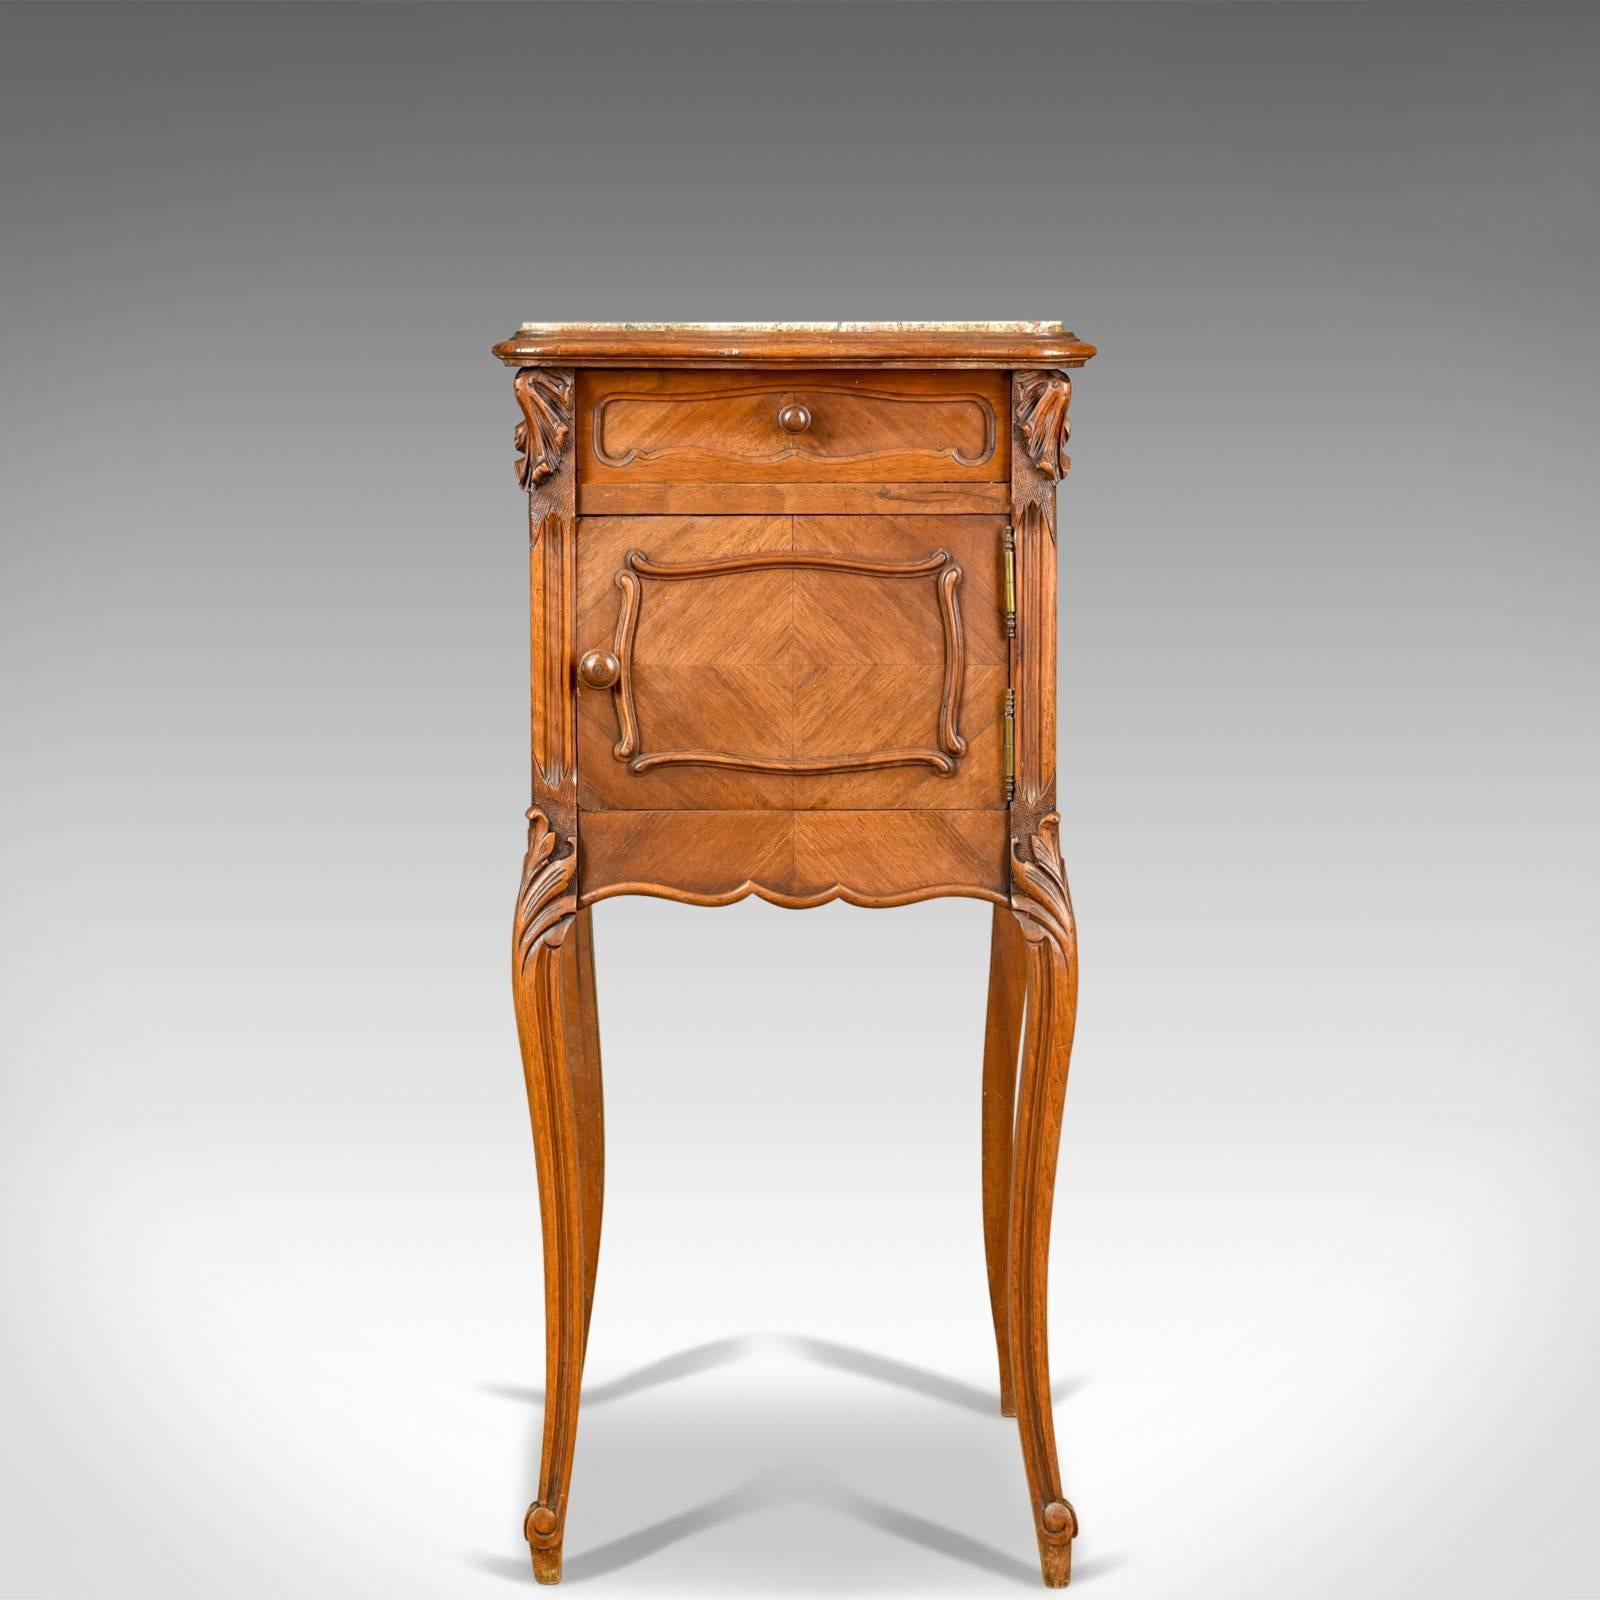 This is an antique bedside cabinet, a French walnut marble top pot cupboard dating to circa 1890.

Elegant form in good proportion and of quality craftsmanship
Attractive tones to the walnut with a mellow wax polished finish
Well figured, inset,